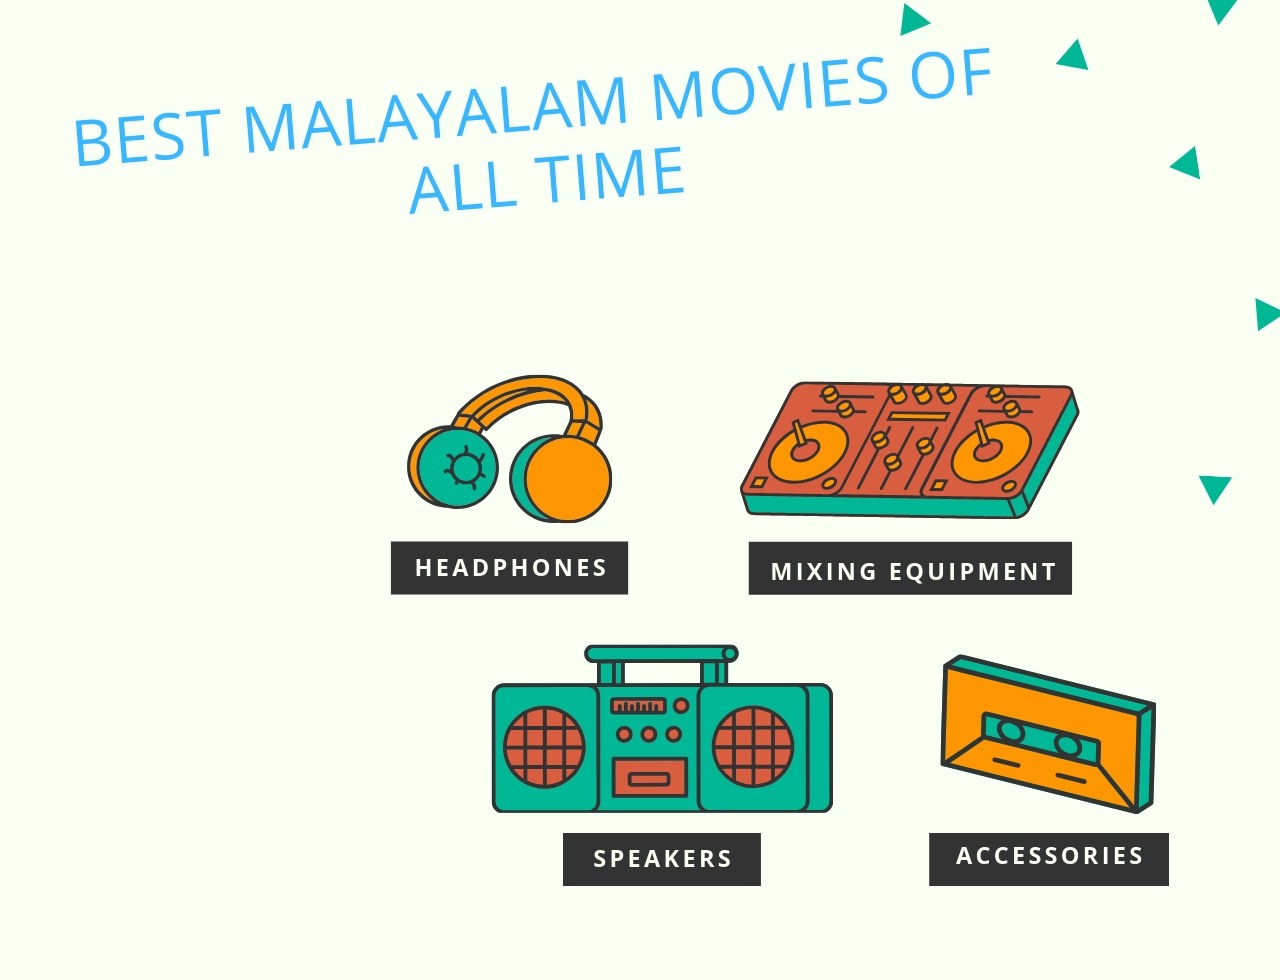 Best Malayalam Movies Of All Time